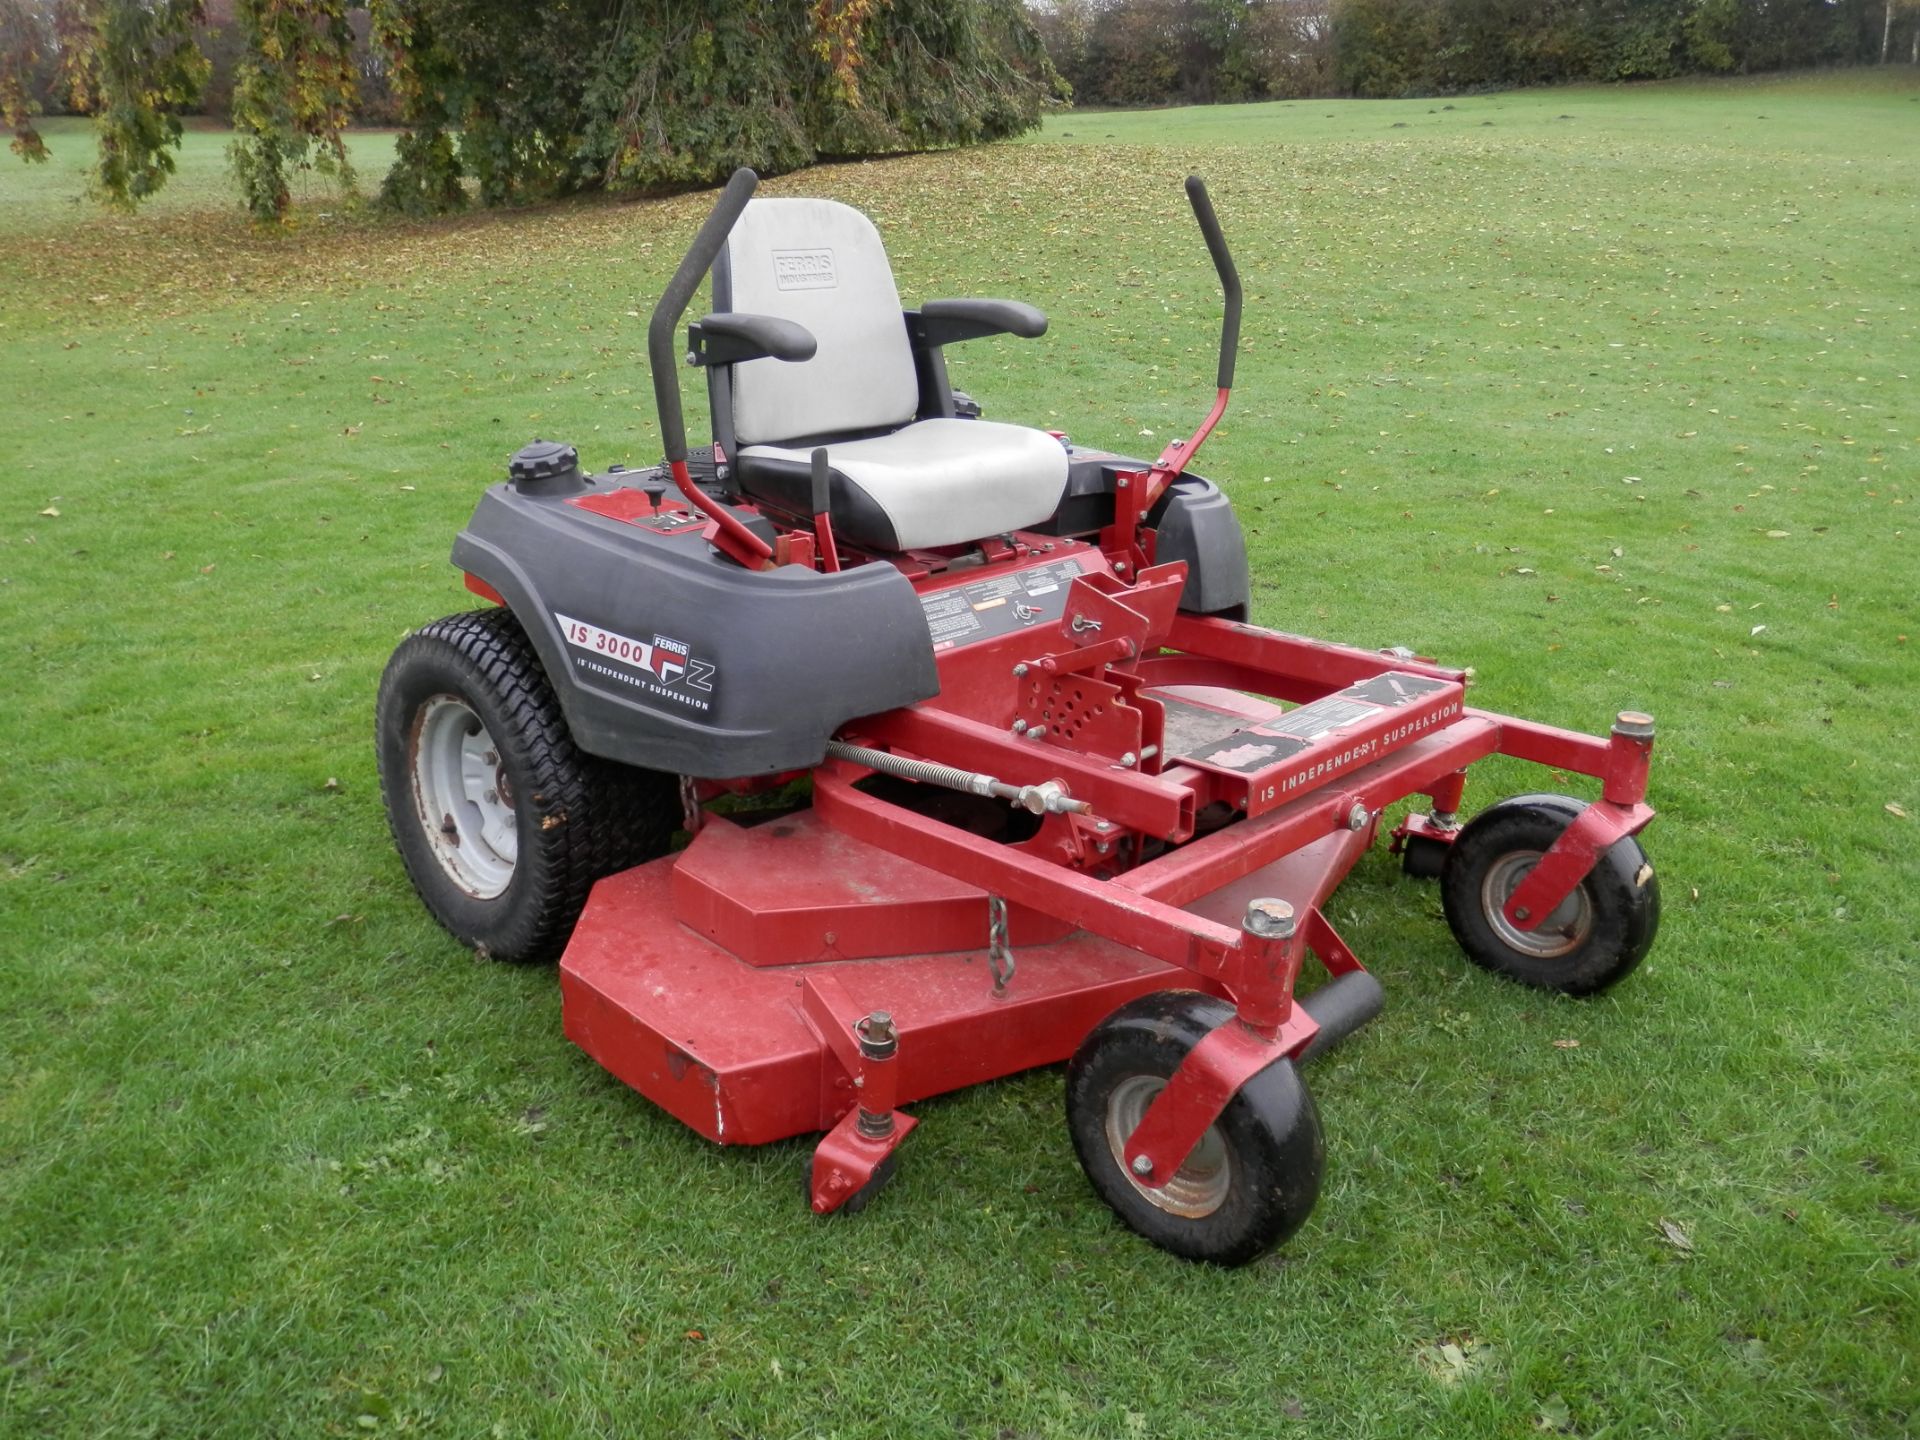 FULLY WORKING FERRIS IS3000 62" CUT RIDE ON ROTARY 25 BHP ENGINED RIDE ON MOWER.